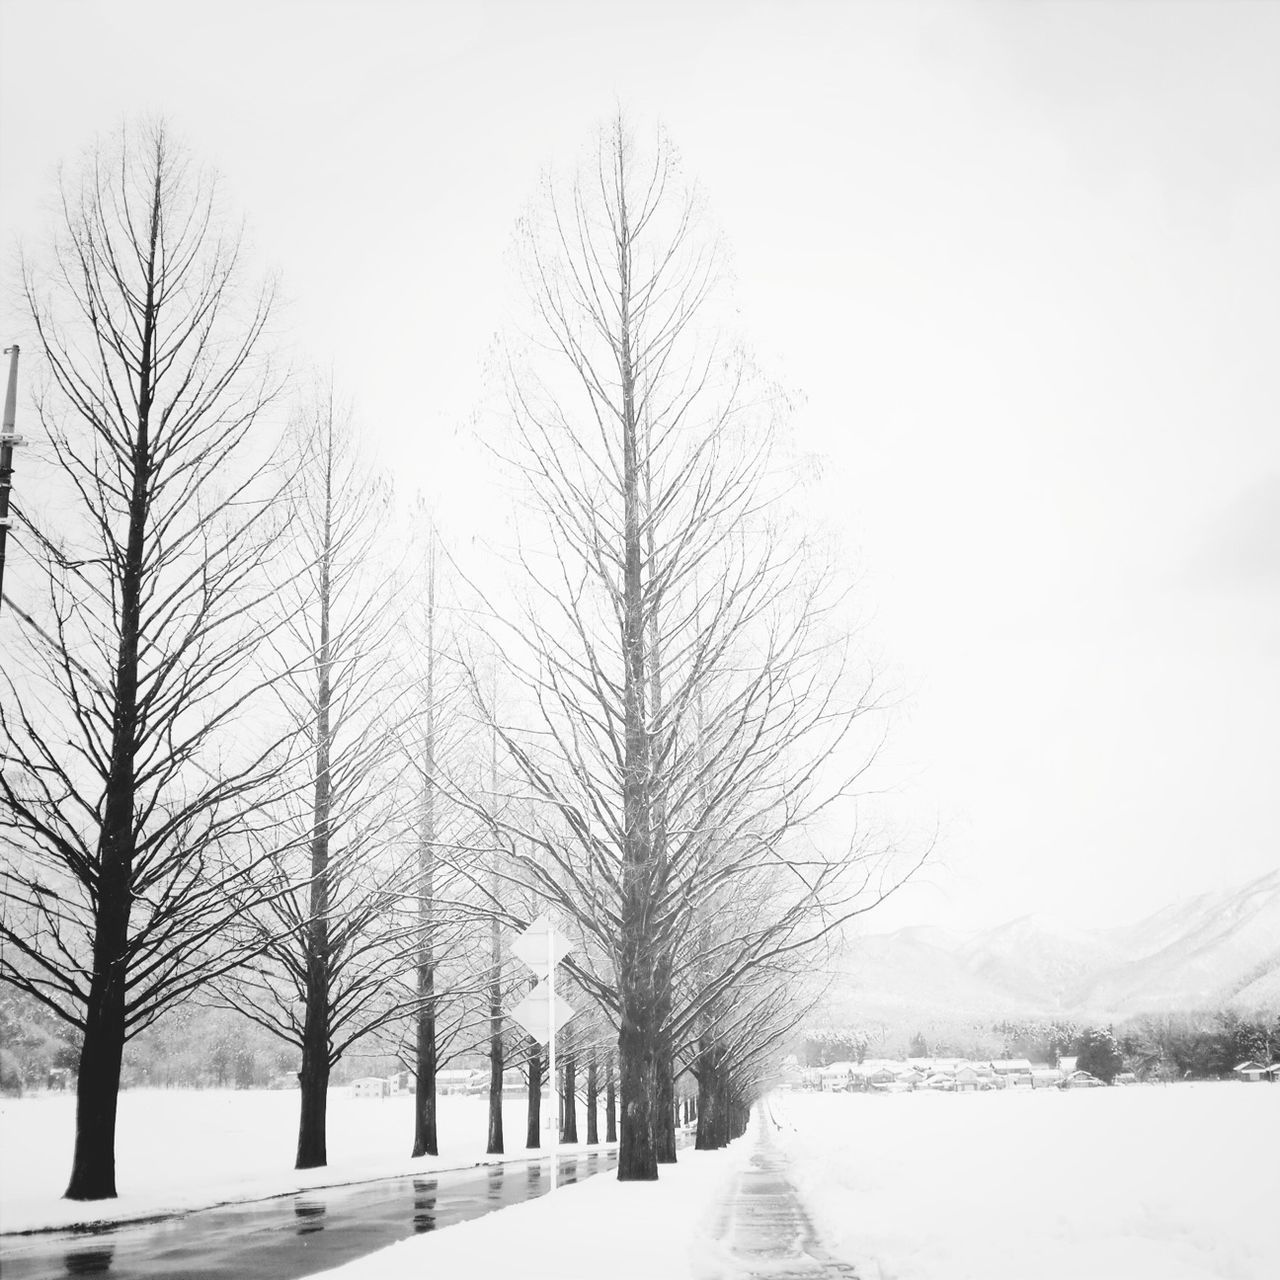 the way forward, tree, bare tree, snow, winter, road, diminishing perspective, cold temperature, vanishing point, transportation, treelined, tranquility, tranquil scene, clear sky, nature, street, empty road, weather, empty, beauty in nature